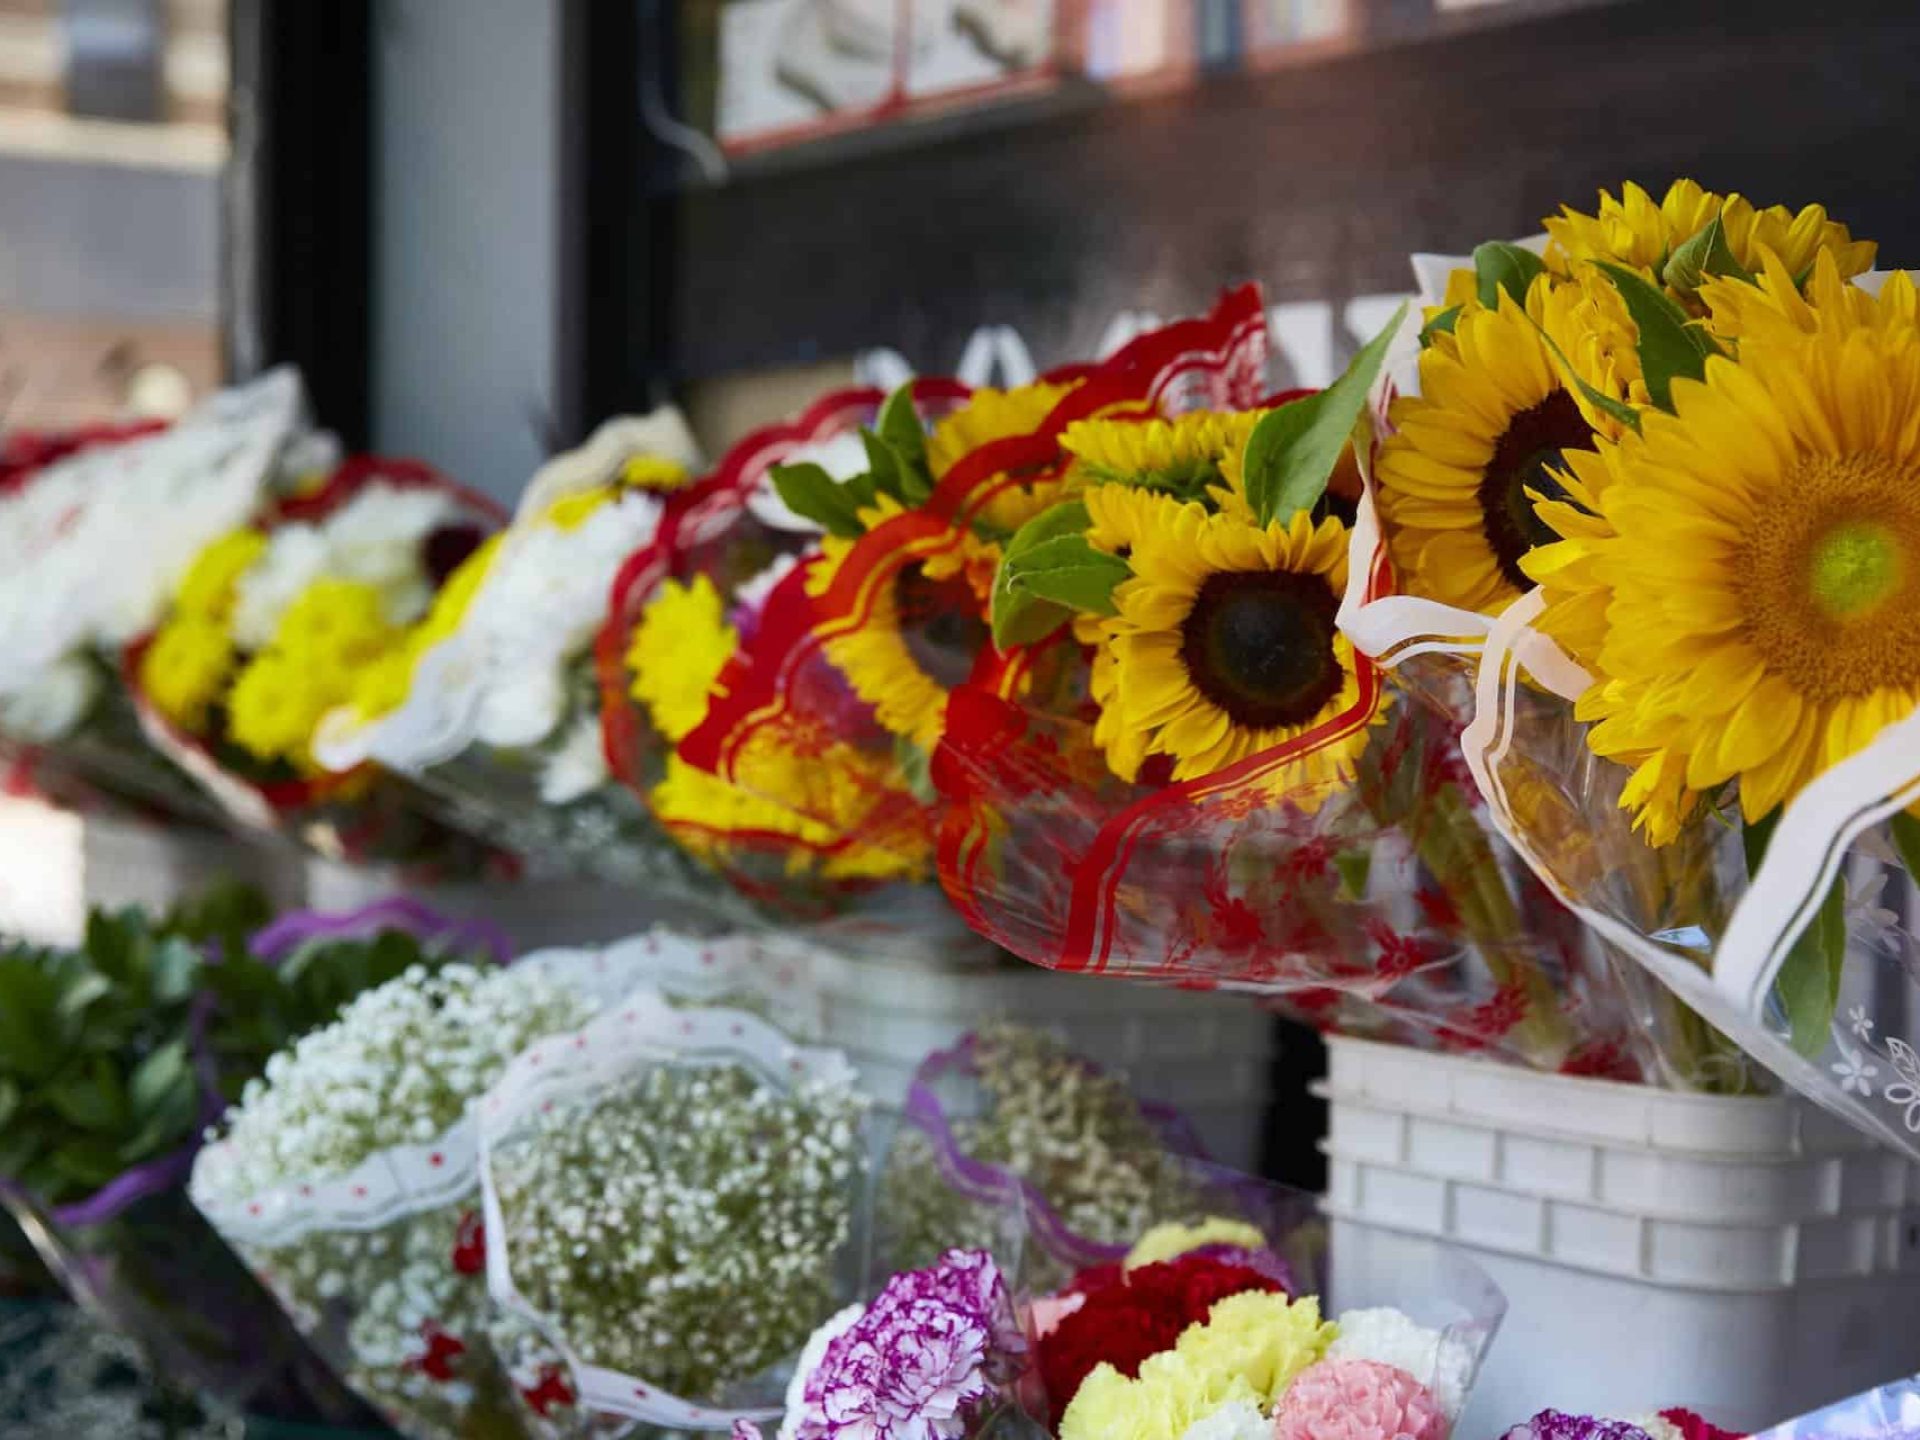 Close up of flowers in a display stand out on the street. Bouquets of sunflowers, daisy's and peony's in white buckets.